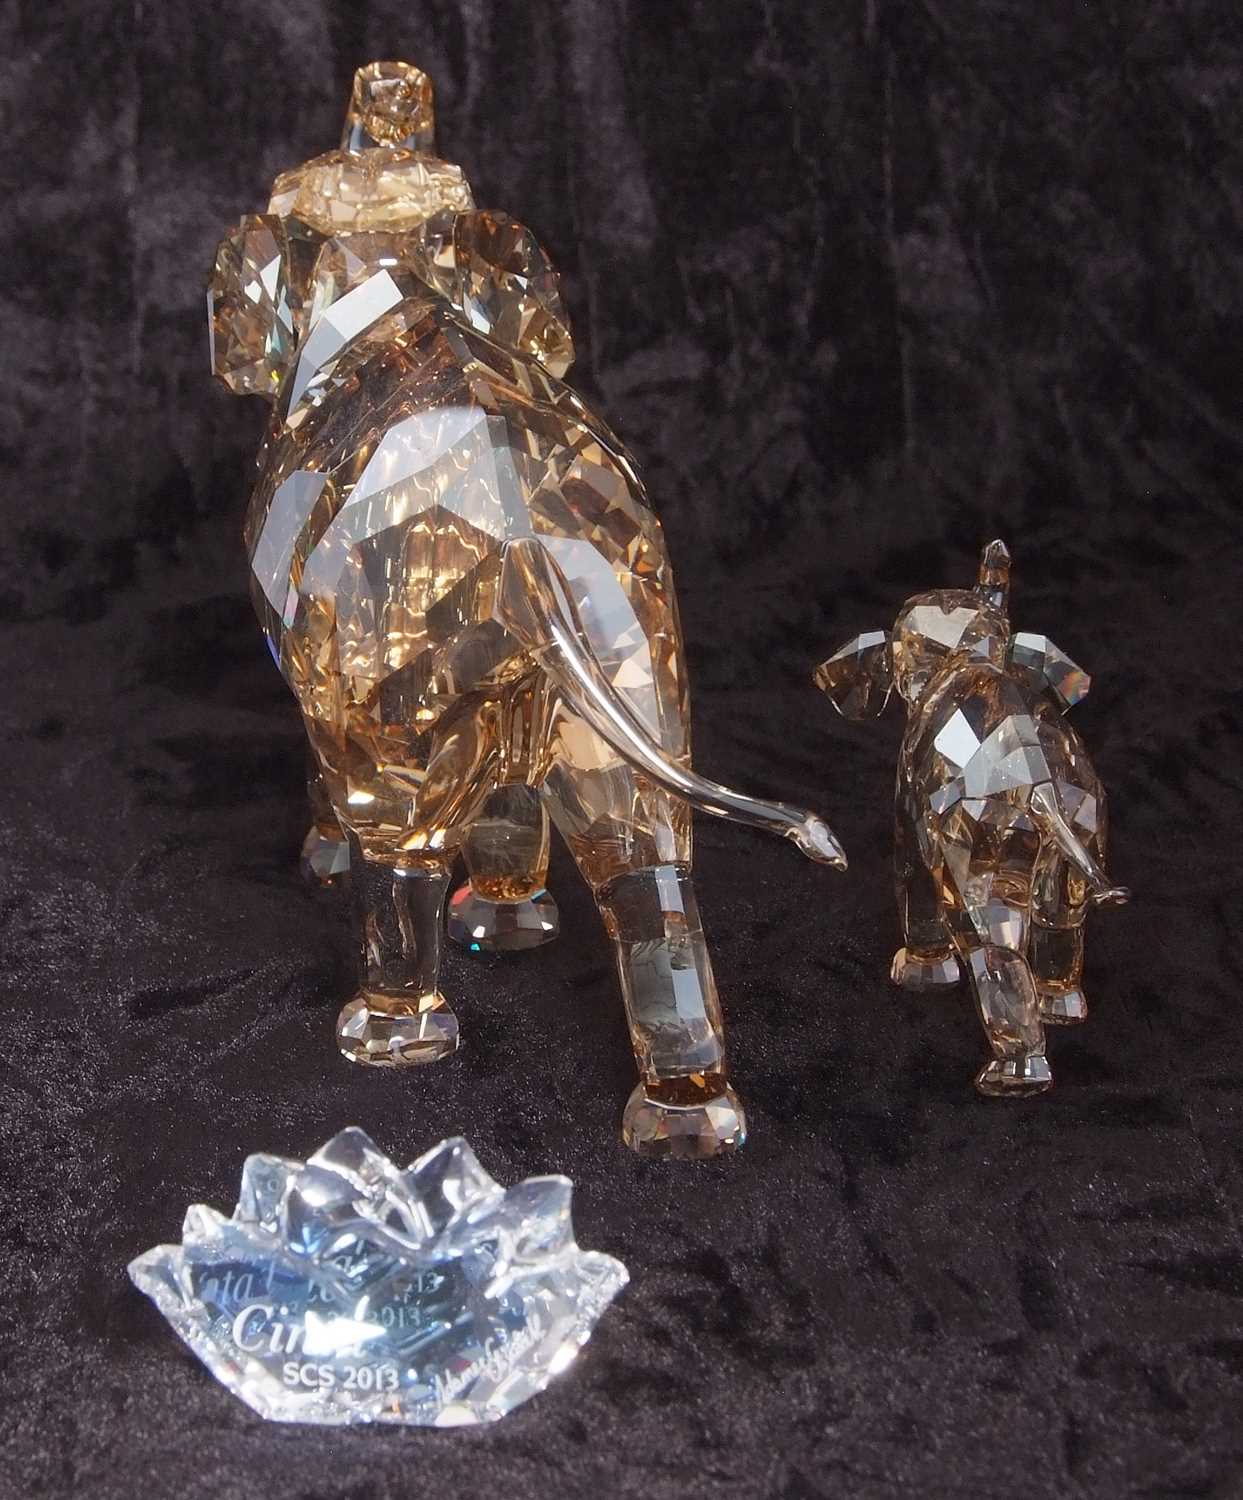 A Swarovski SCS annual edition figure of Cinta elephant together with a baby elephant, 2013, with - Image 11 of 11